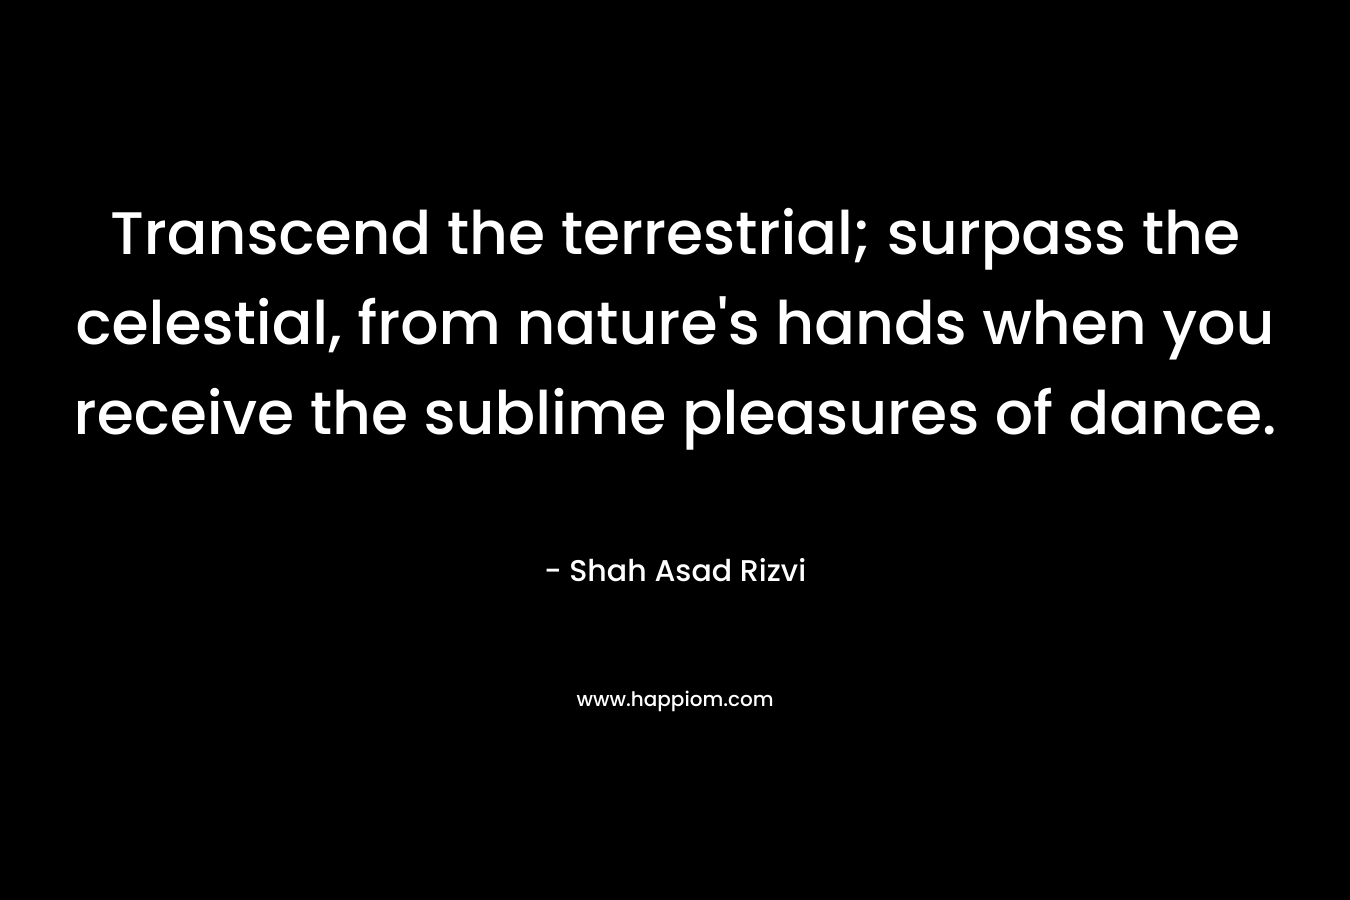 Transcend the terrestrial; surpass the celestial, from nature's hands when you receive the sublime pleasures of dance.